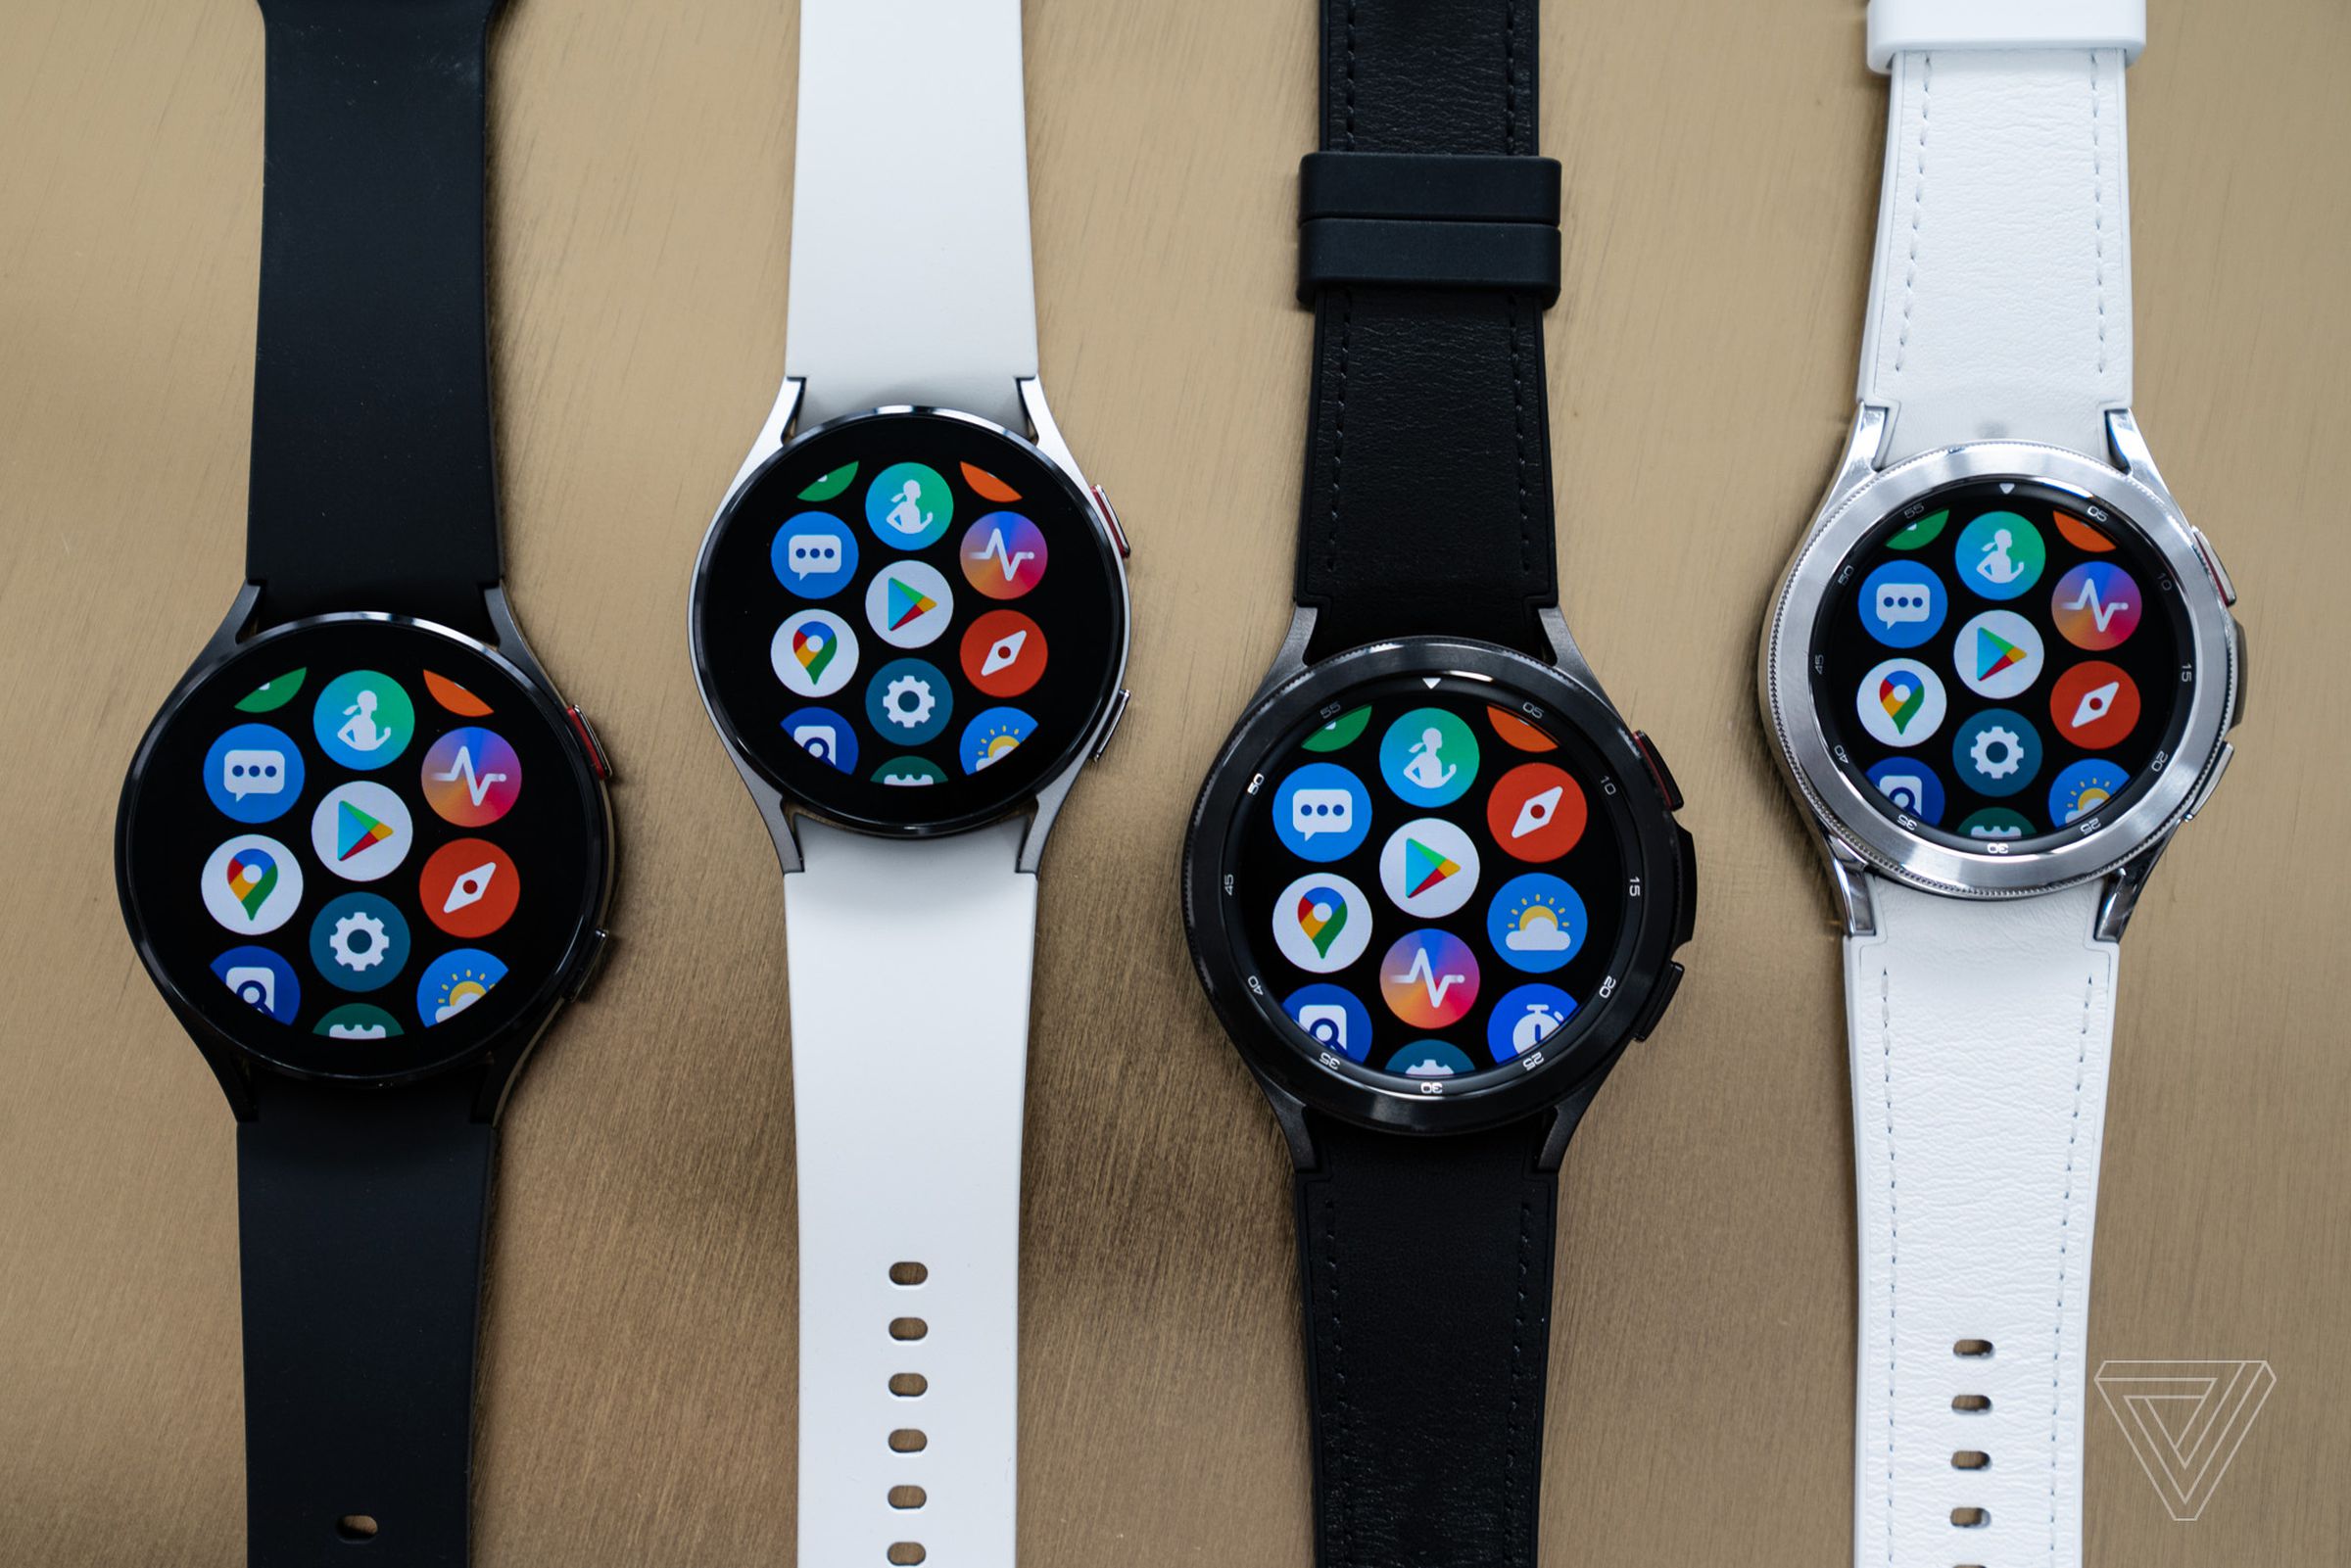 From left to right: the 44mm and 40mm Watch 4, and the 46mm and 42mm Watch 4 Classic.